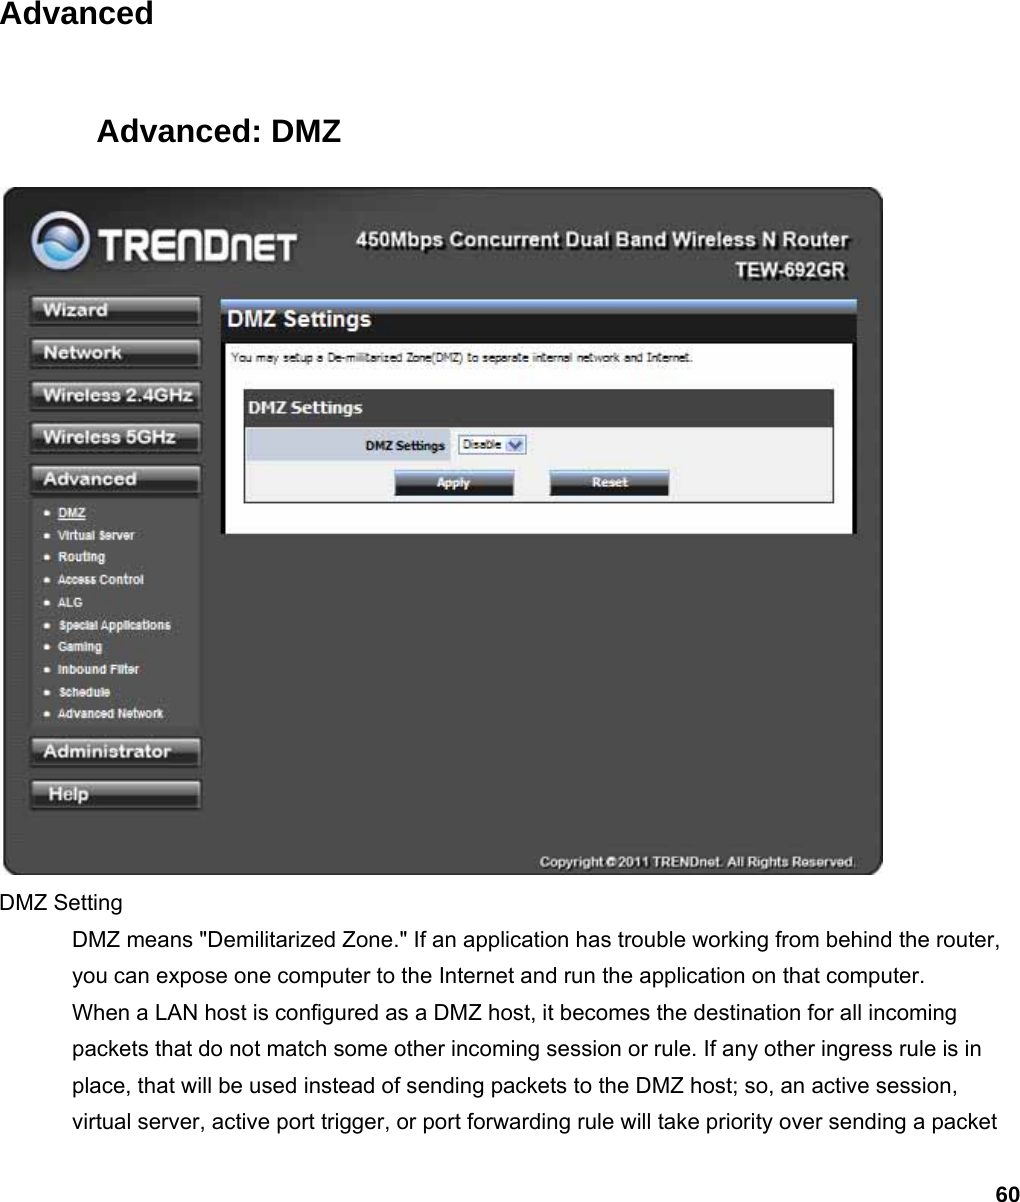 60  Advanced Advanced: DMZ  DMZ Setting   DMZ means &quot;Demilitarized Zone.&quot; If an application has trouble working from behind the router, you can expose one computer to the Internet and run the application on that computer.   When a LAN host is configured as a DMZ host, it becomes the destination for all incoming packets that do not match some other incoming session or rule. If any other ingress rule is in place, that will be used instead of sending packets to the DMZ host; so, an active session, virtual server, active port trigger, or port forwarding rule will take priority over sending a packet 